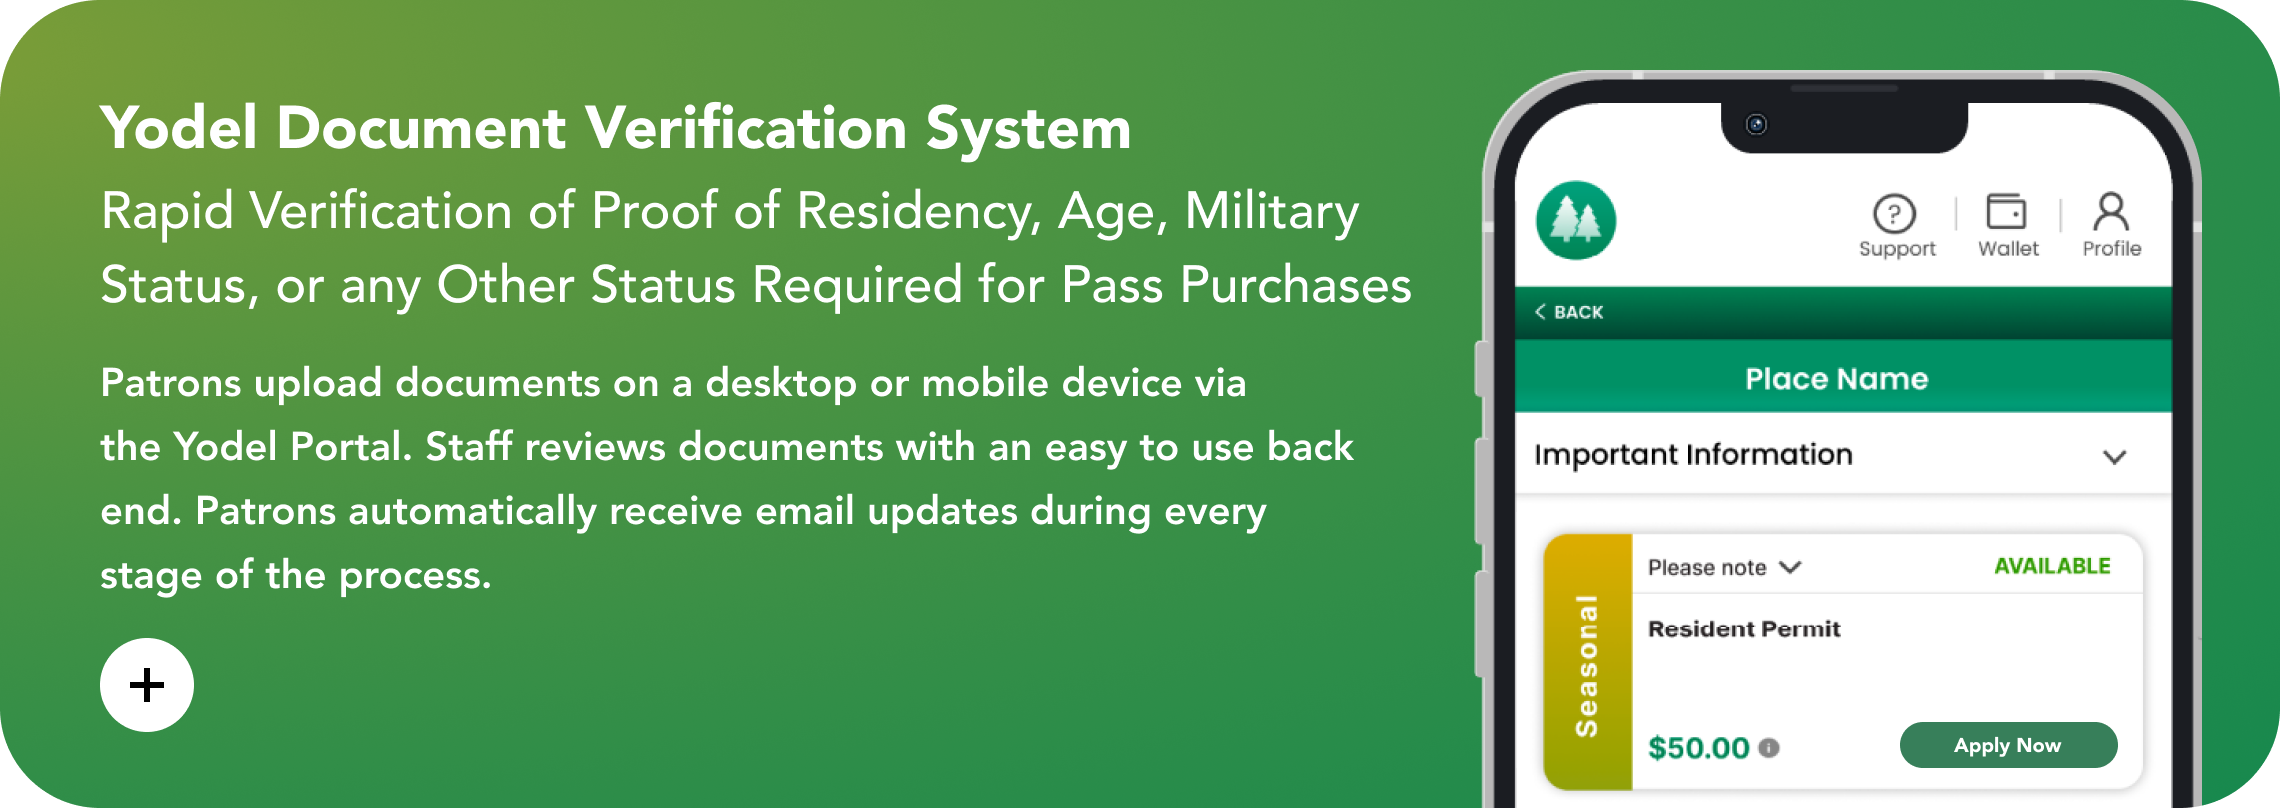 Yodel Document Verification System. Rapid Verification of Proof of Residency, Age, Military Status, or any Other Status Required for Pass Purchases.